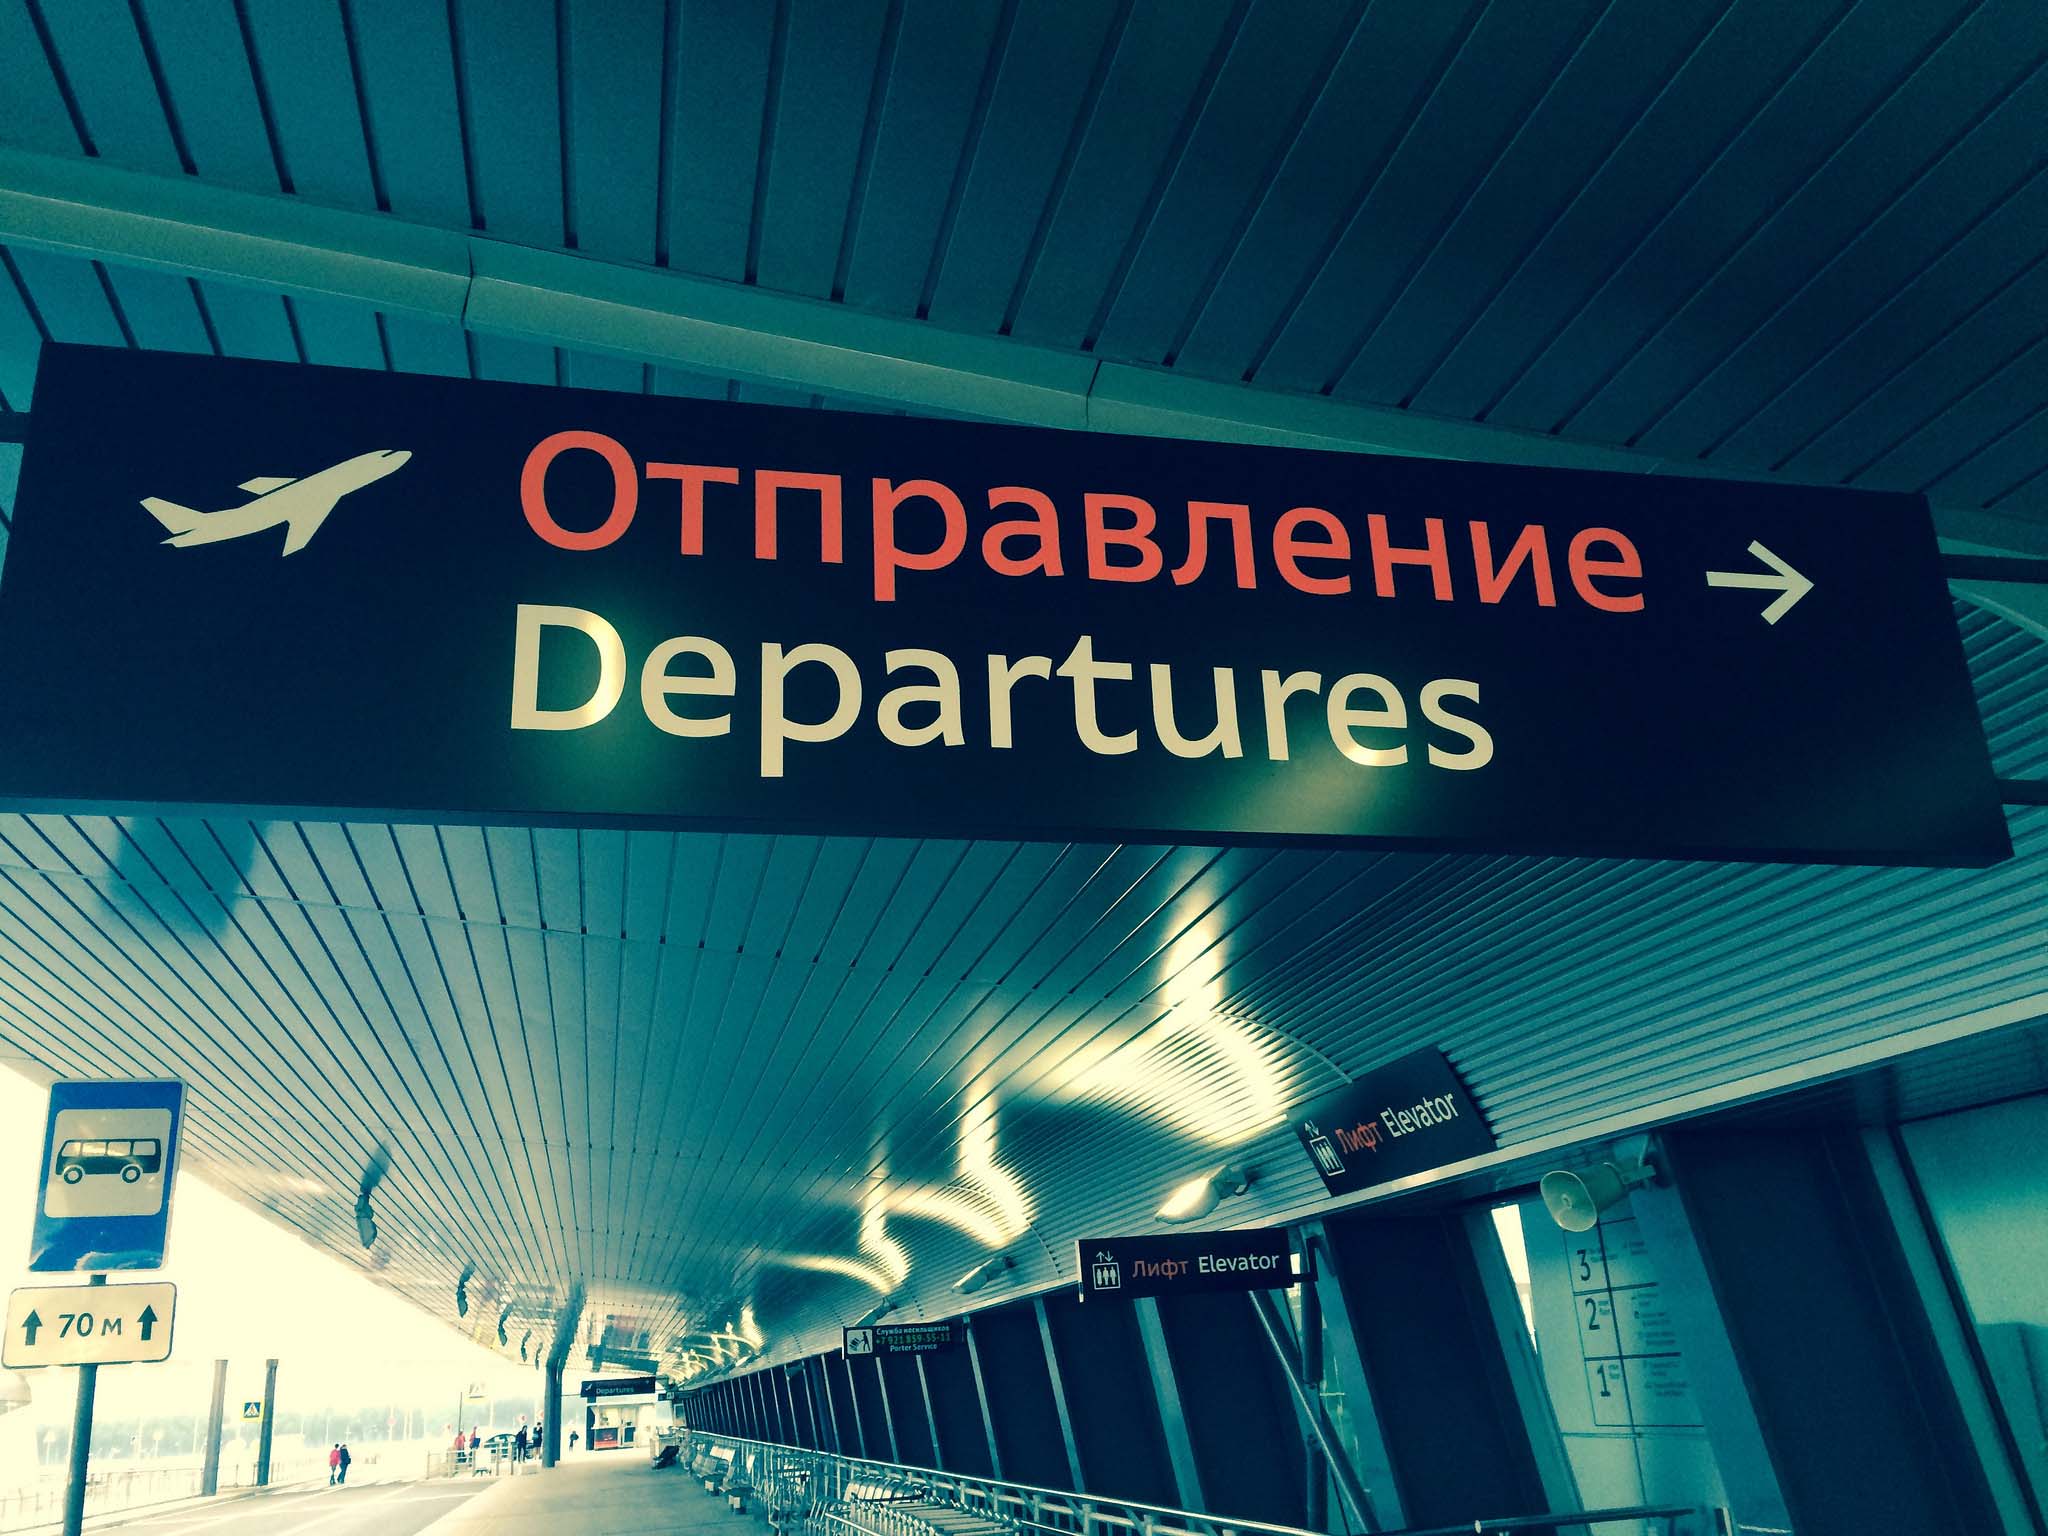 A sign at St Petersburg Airport